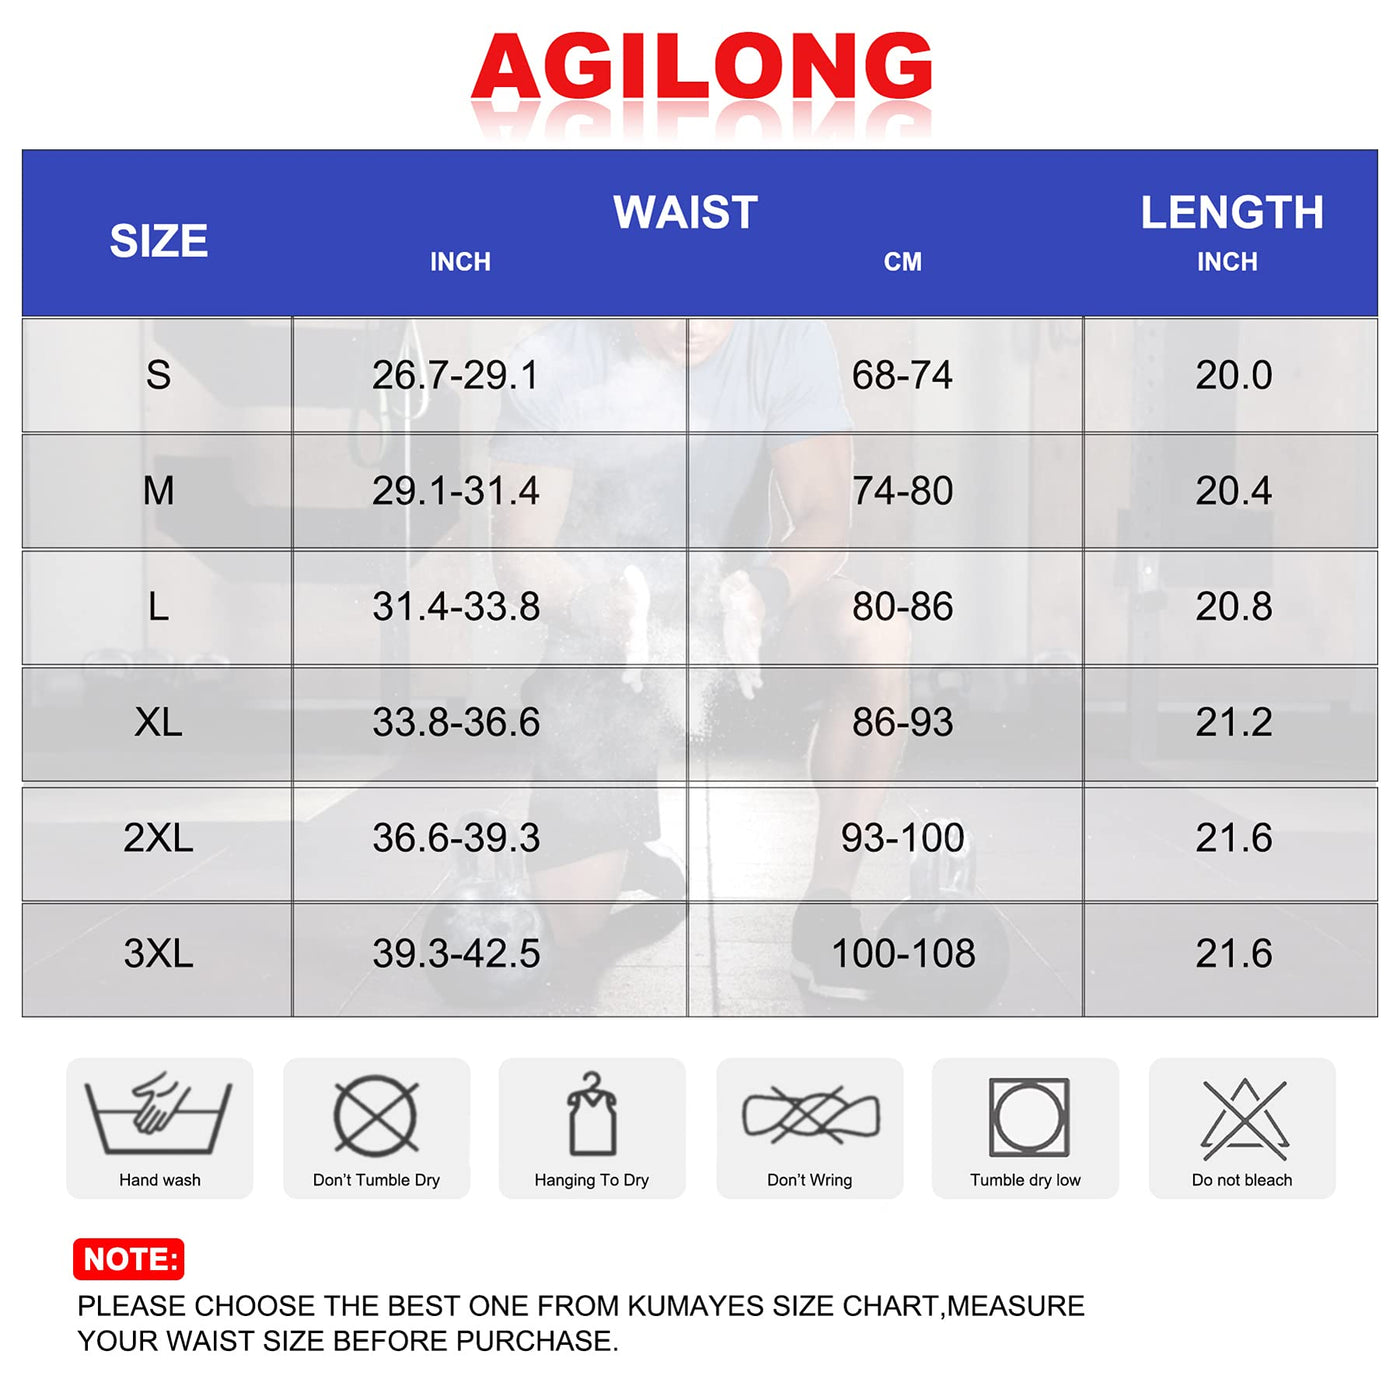  AGILONG Sauna Suit for Women Weight Loss Slimming Body